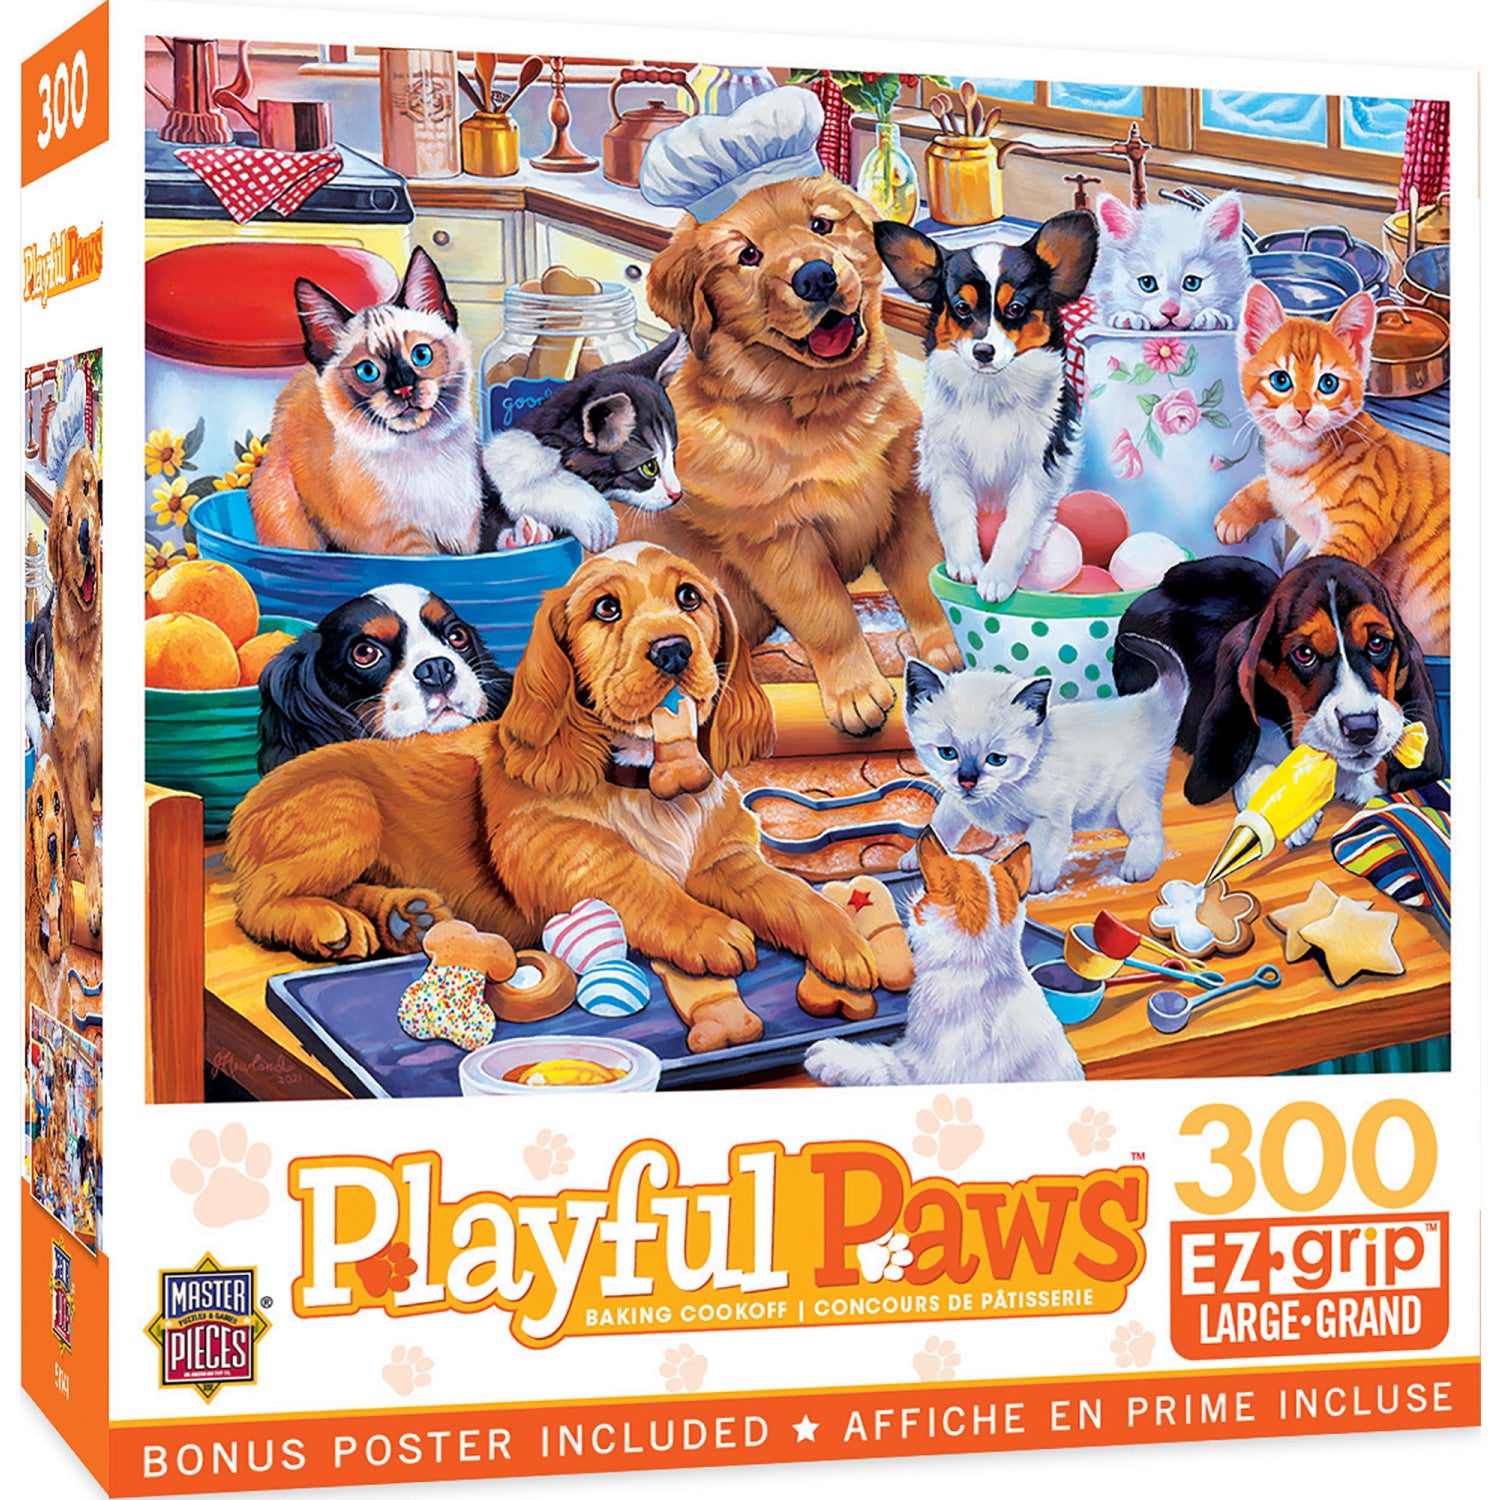 Playful Paws - Baking Cookoff 300 Piece EZ Grip Jigsaw Puzzle